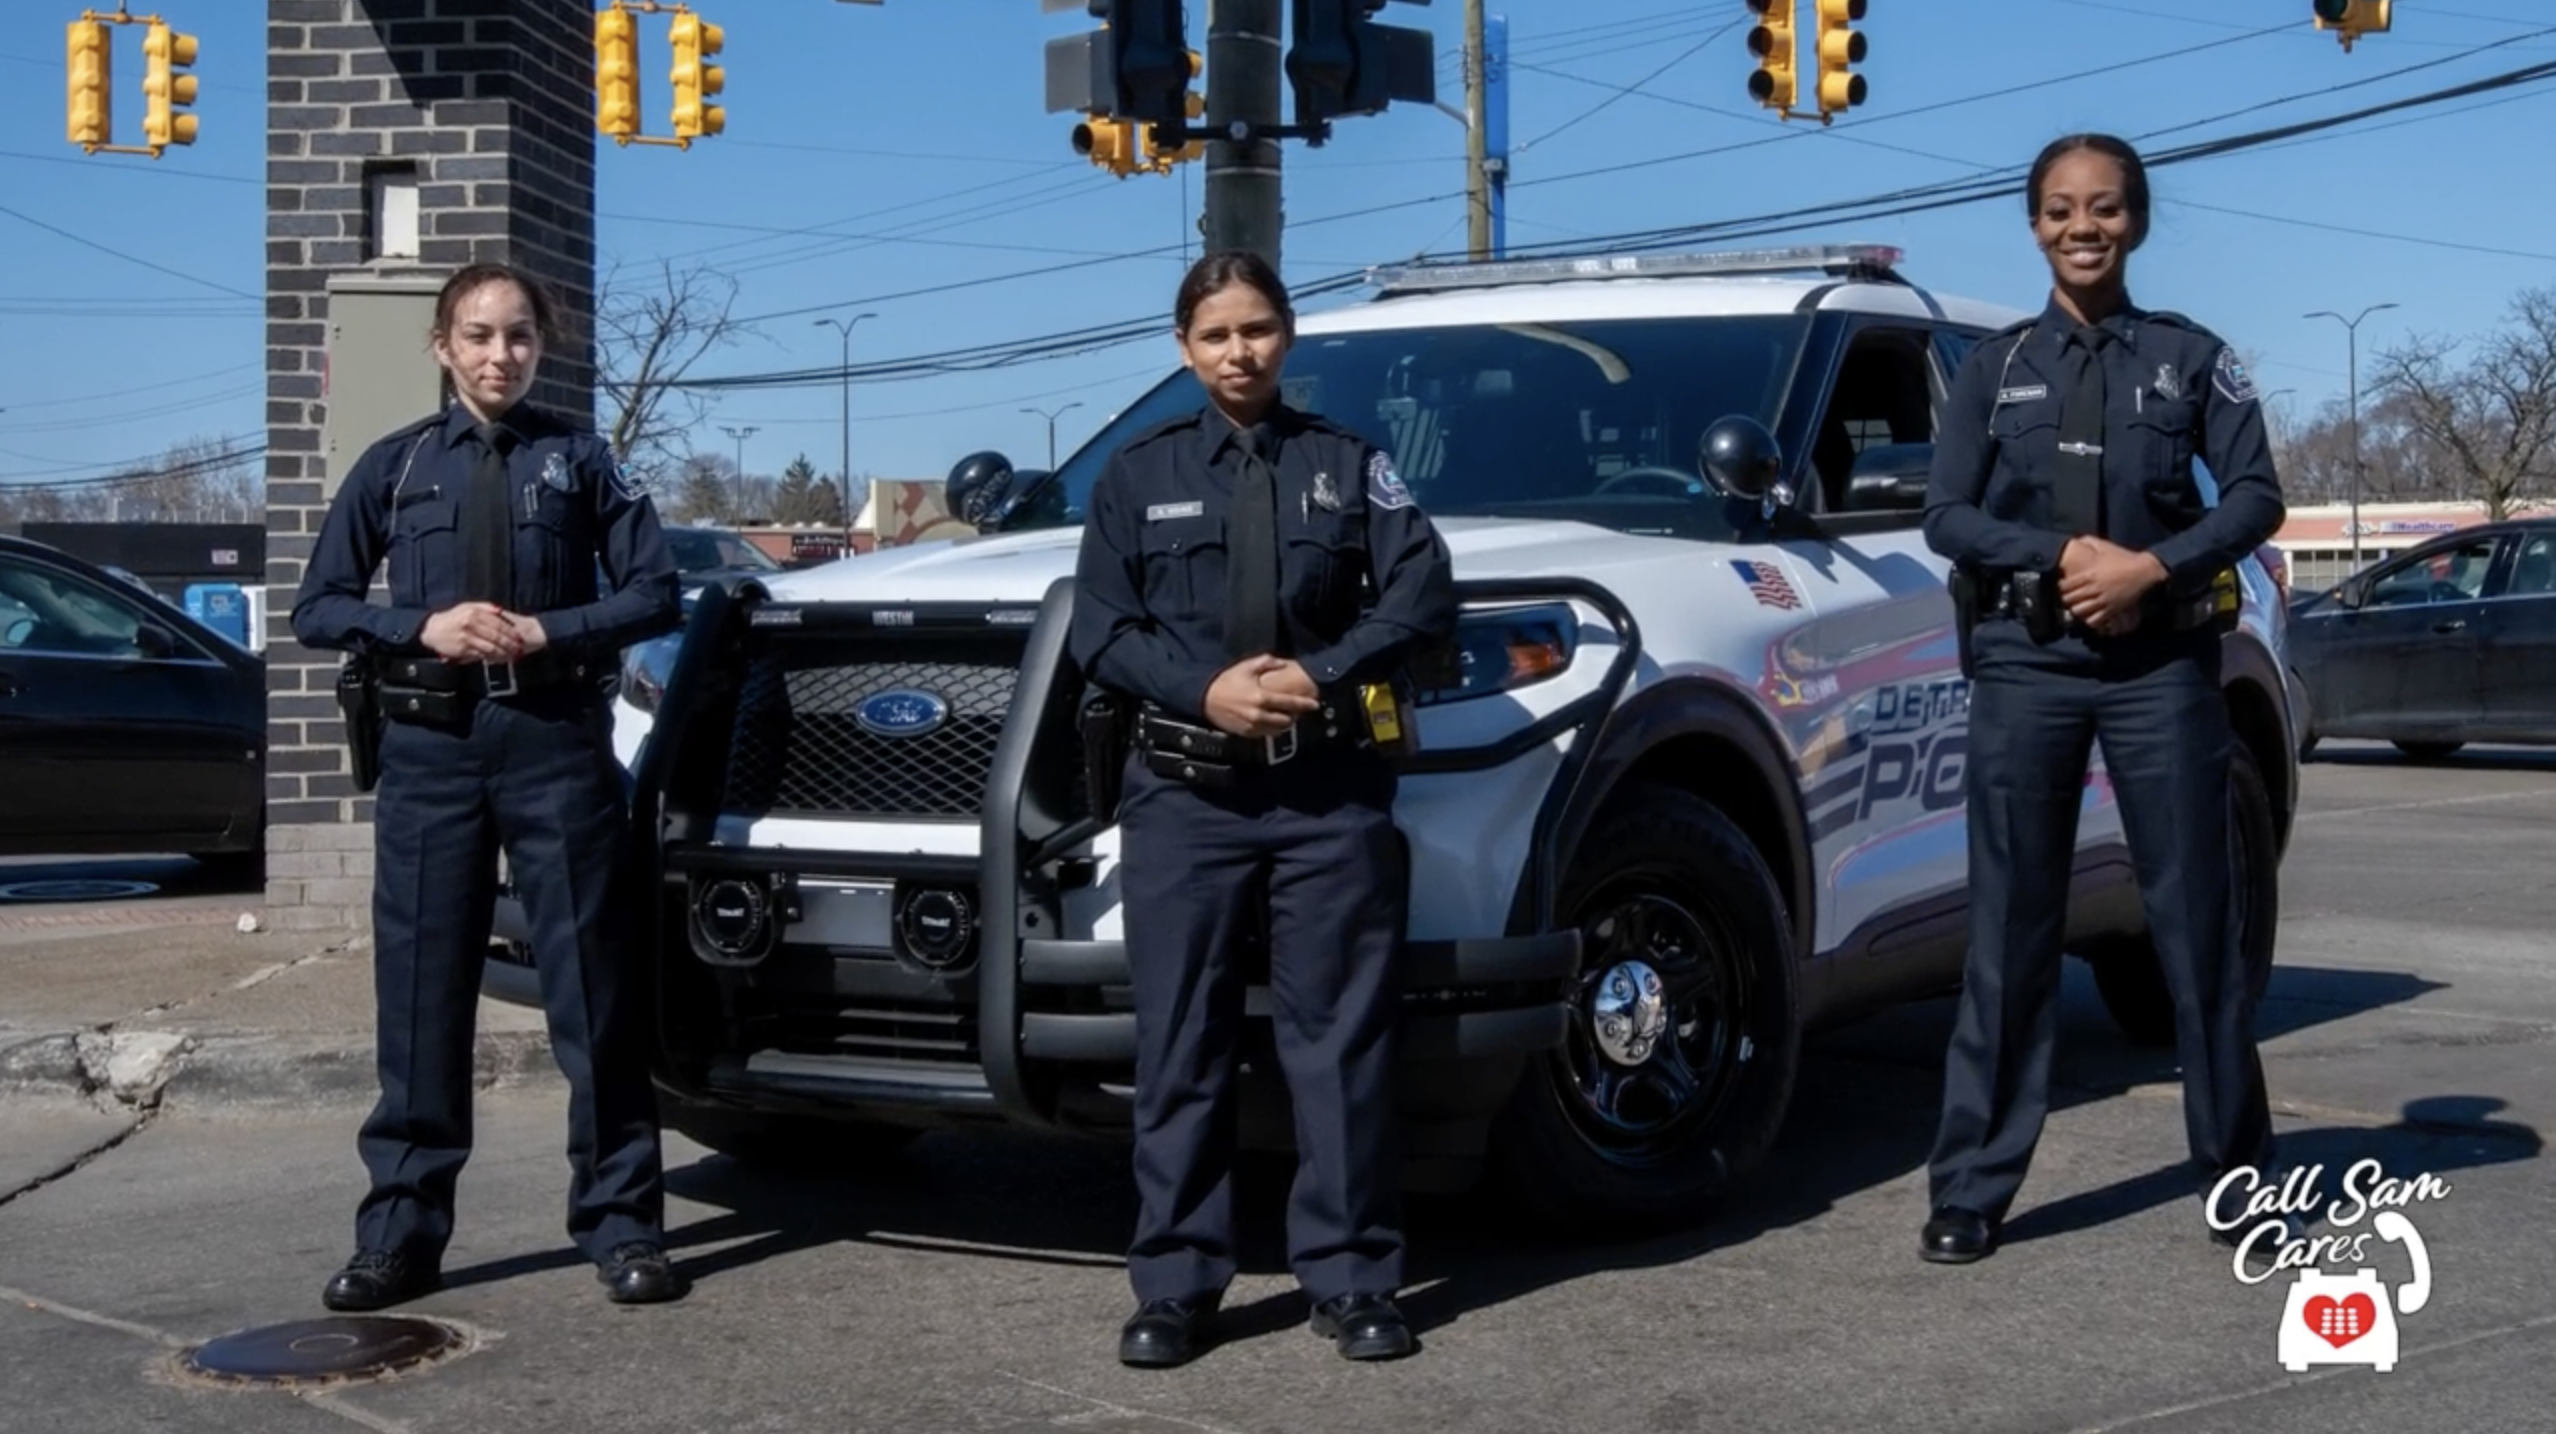 Three woman police officers standing in front of a police car.